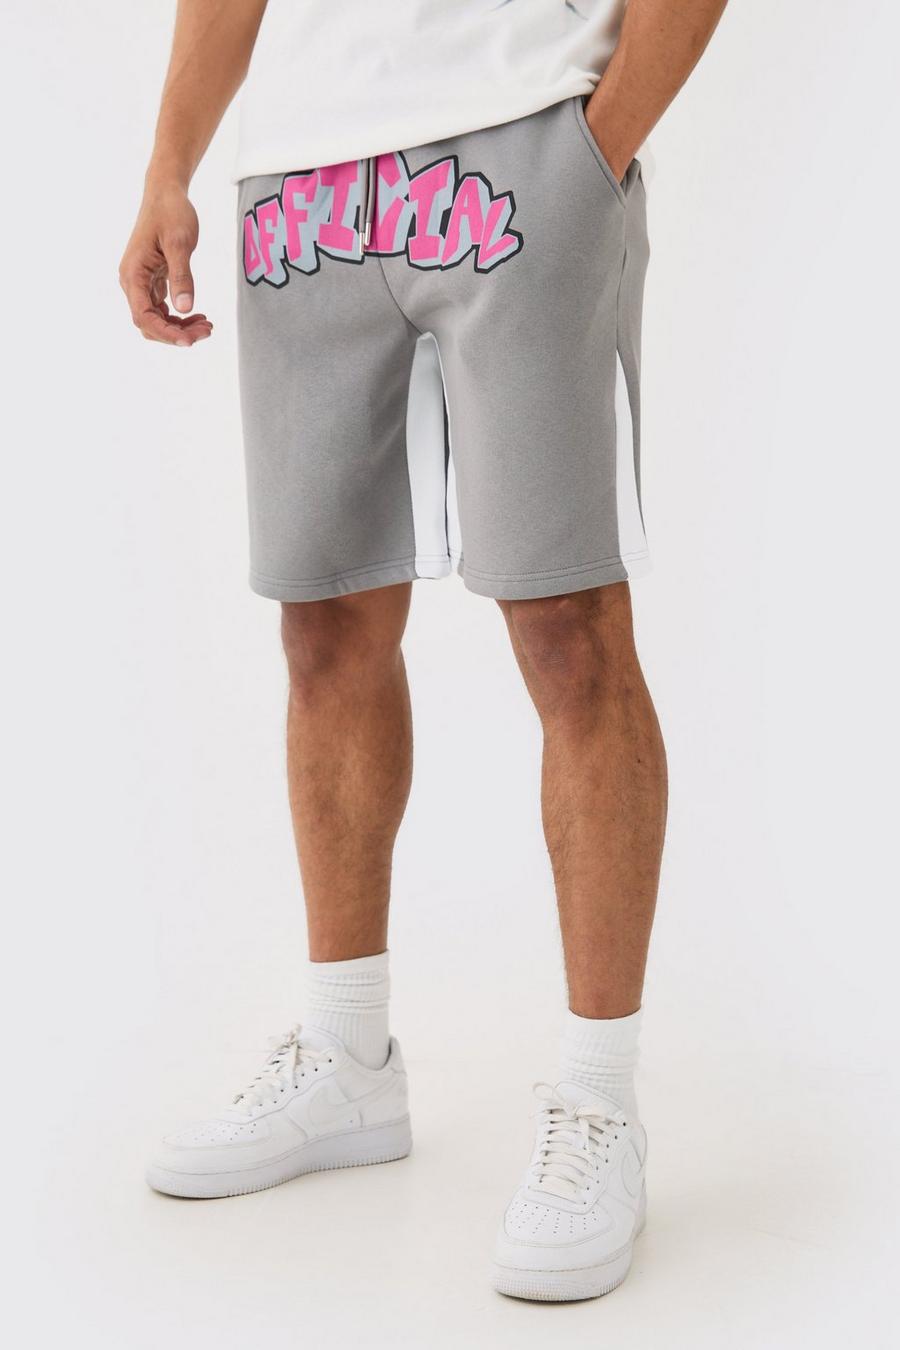 Charcoal Official Oversize shorts med graffititryck